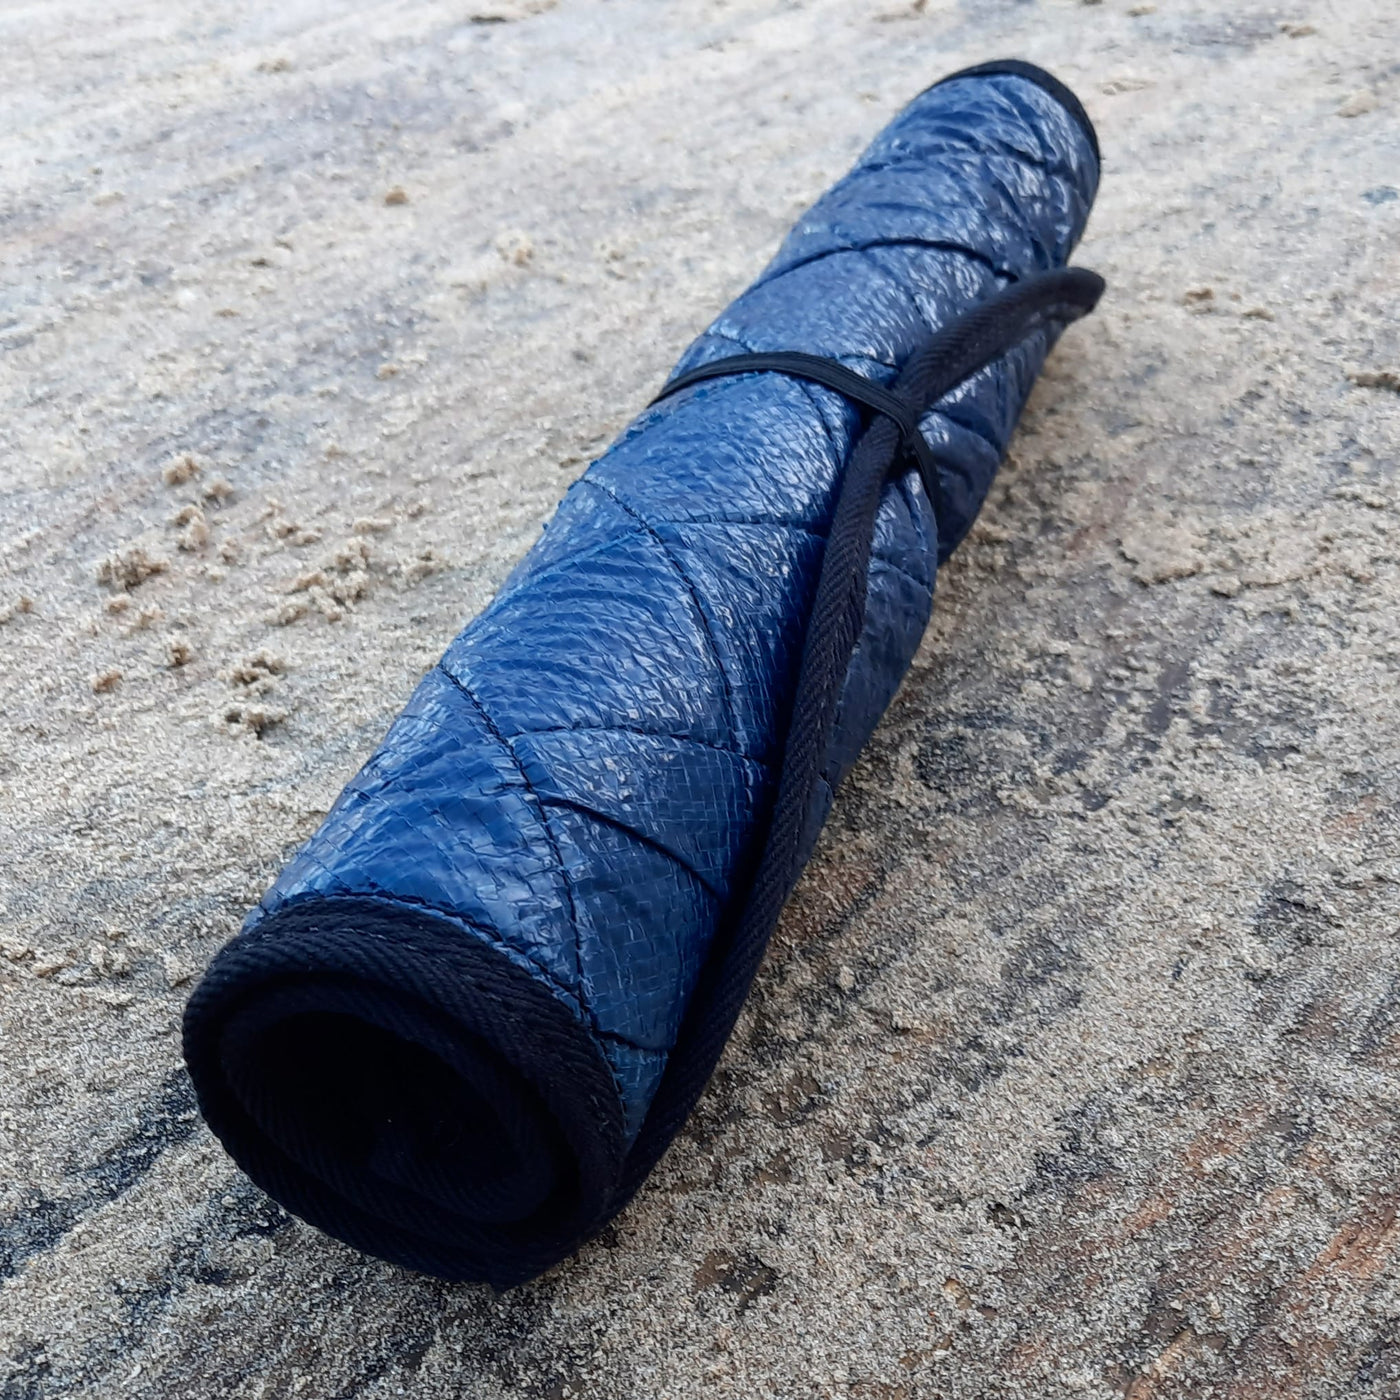 A rolled up changing mat